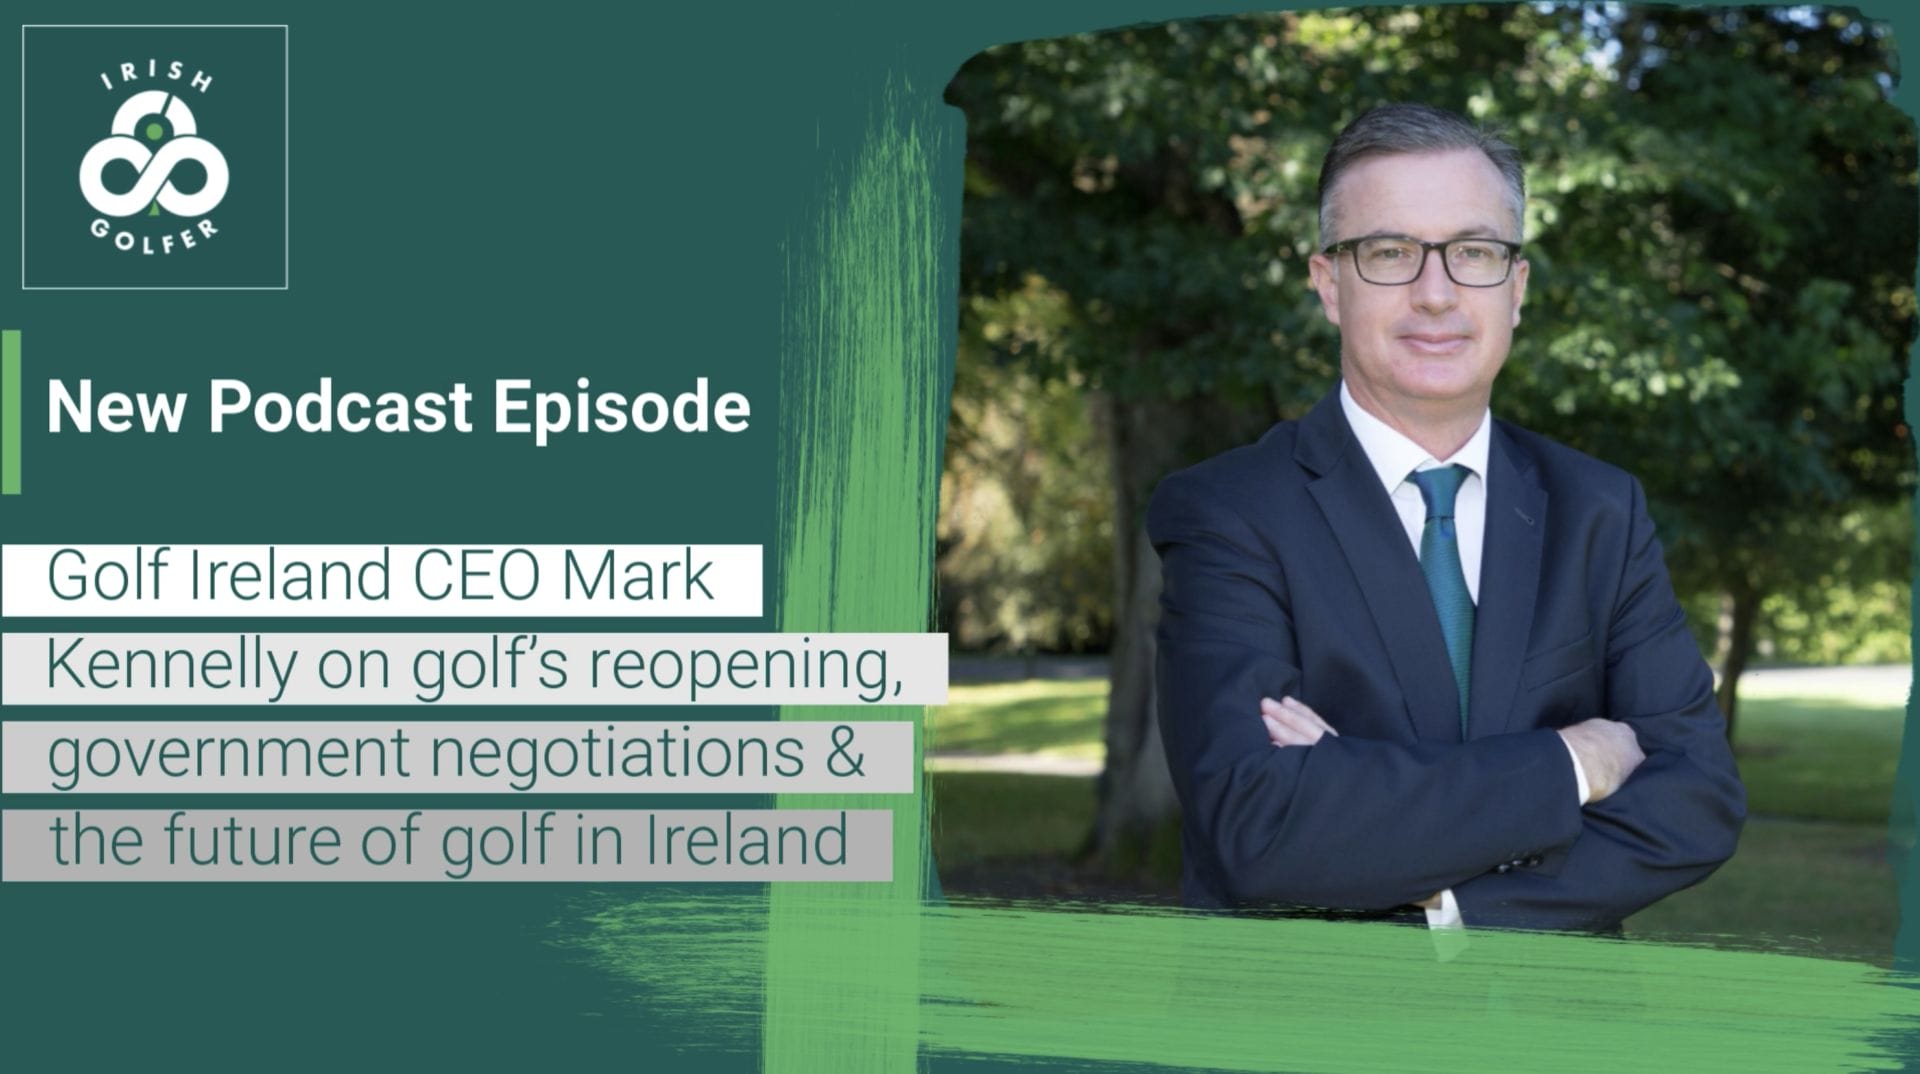 Podcast: Golf Ireland CEO Kennelly on Golf’s Reopening, Government Negotiations & the future